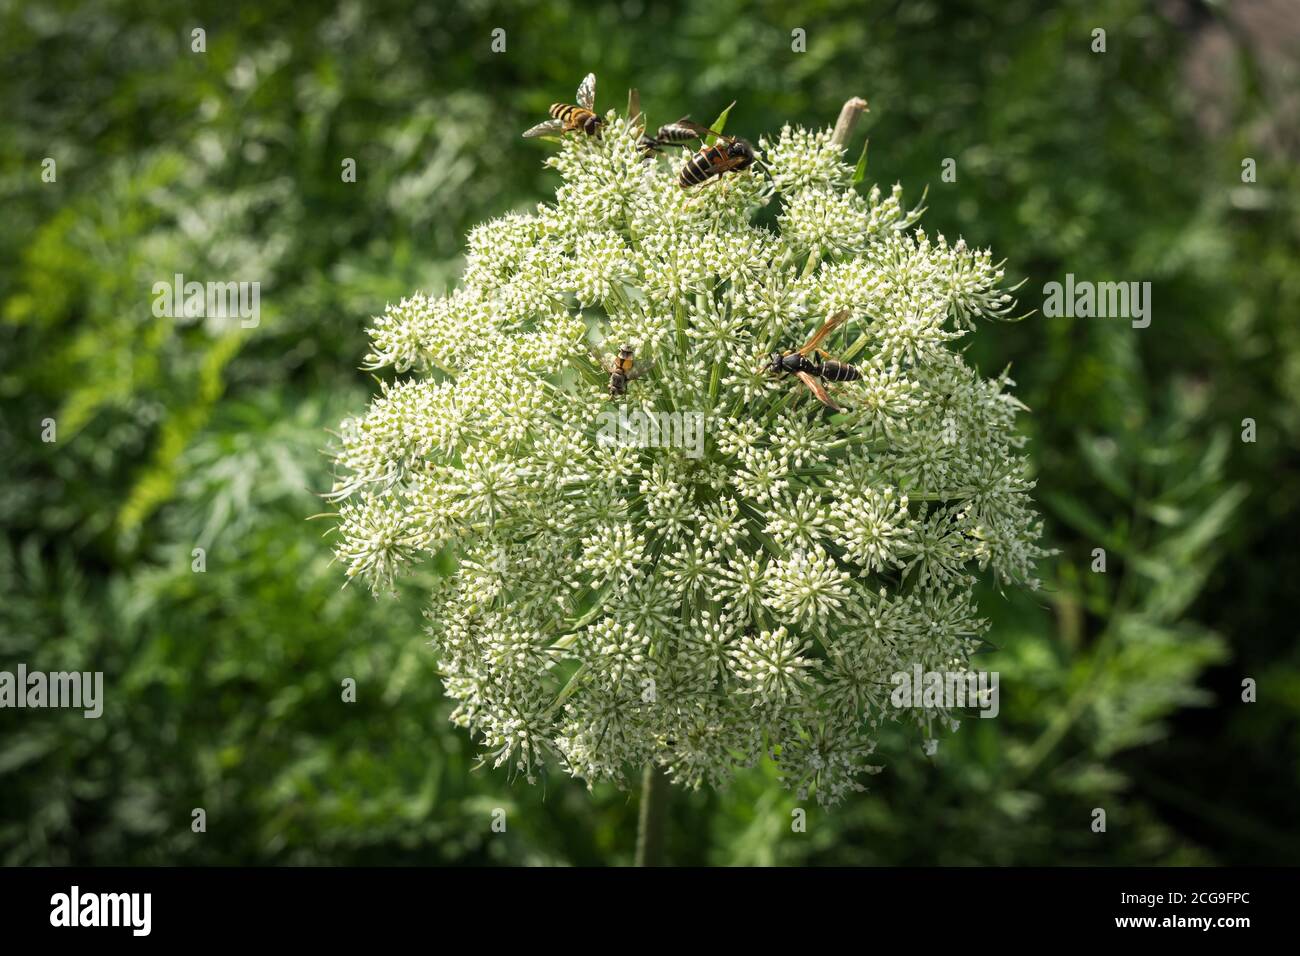 Umbrella inflorescence of carrot seed (lat. Daucus carota subsp. sativus) with wasps sitting on it. Stock Photo